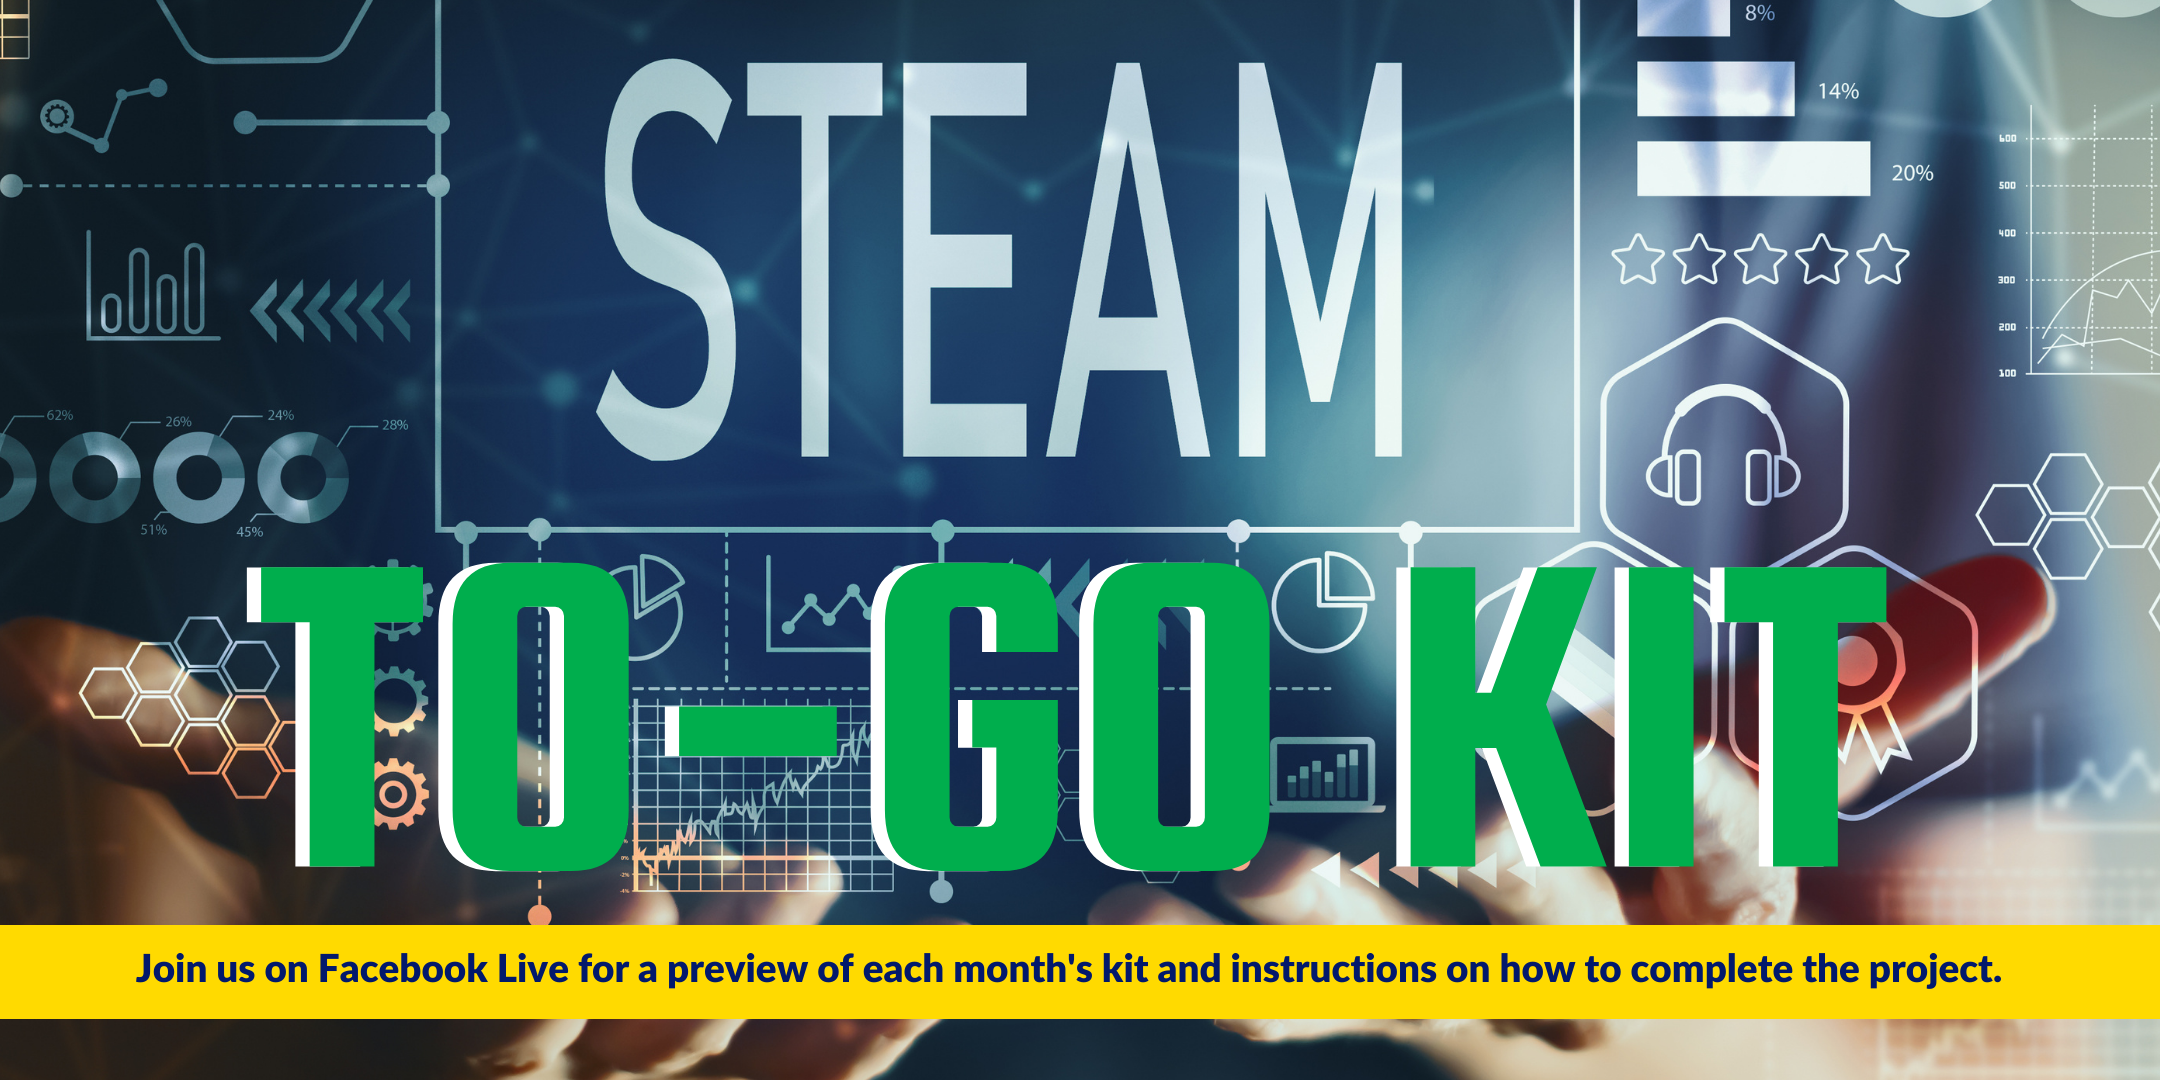 STEAM-to-Go Kit image